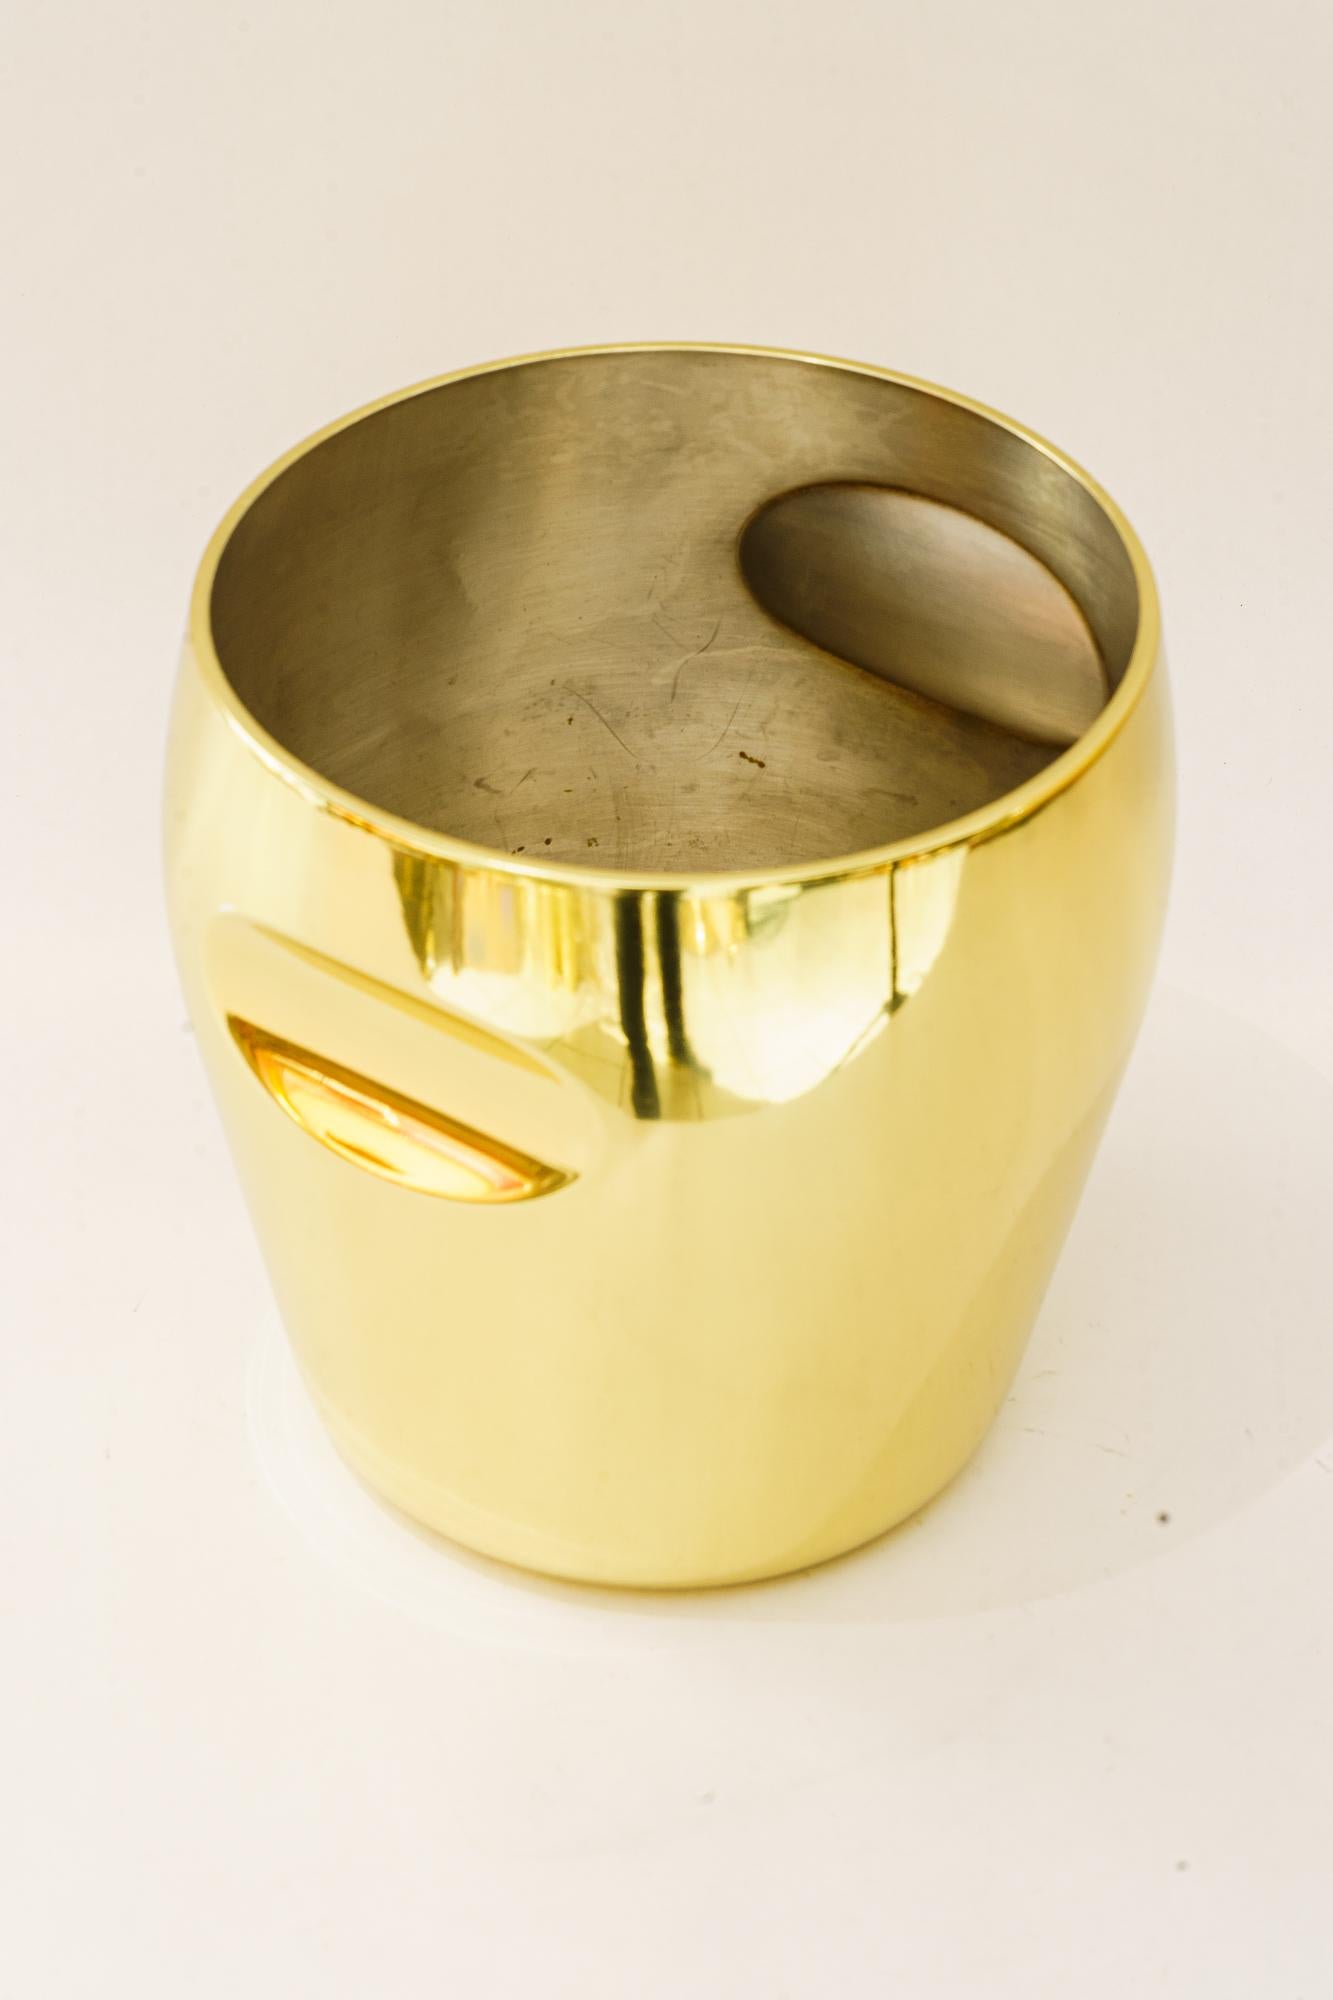 Brass Champagne Bucket italy around 1950s with insert inside.
Brass polished and stove enameled.

